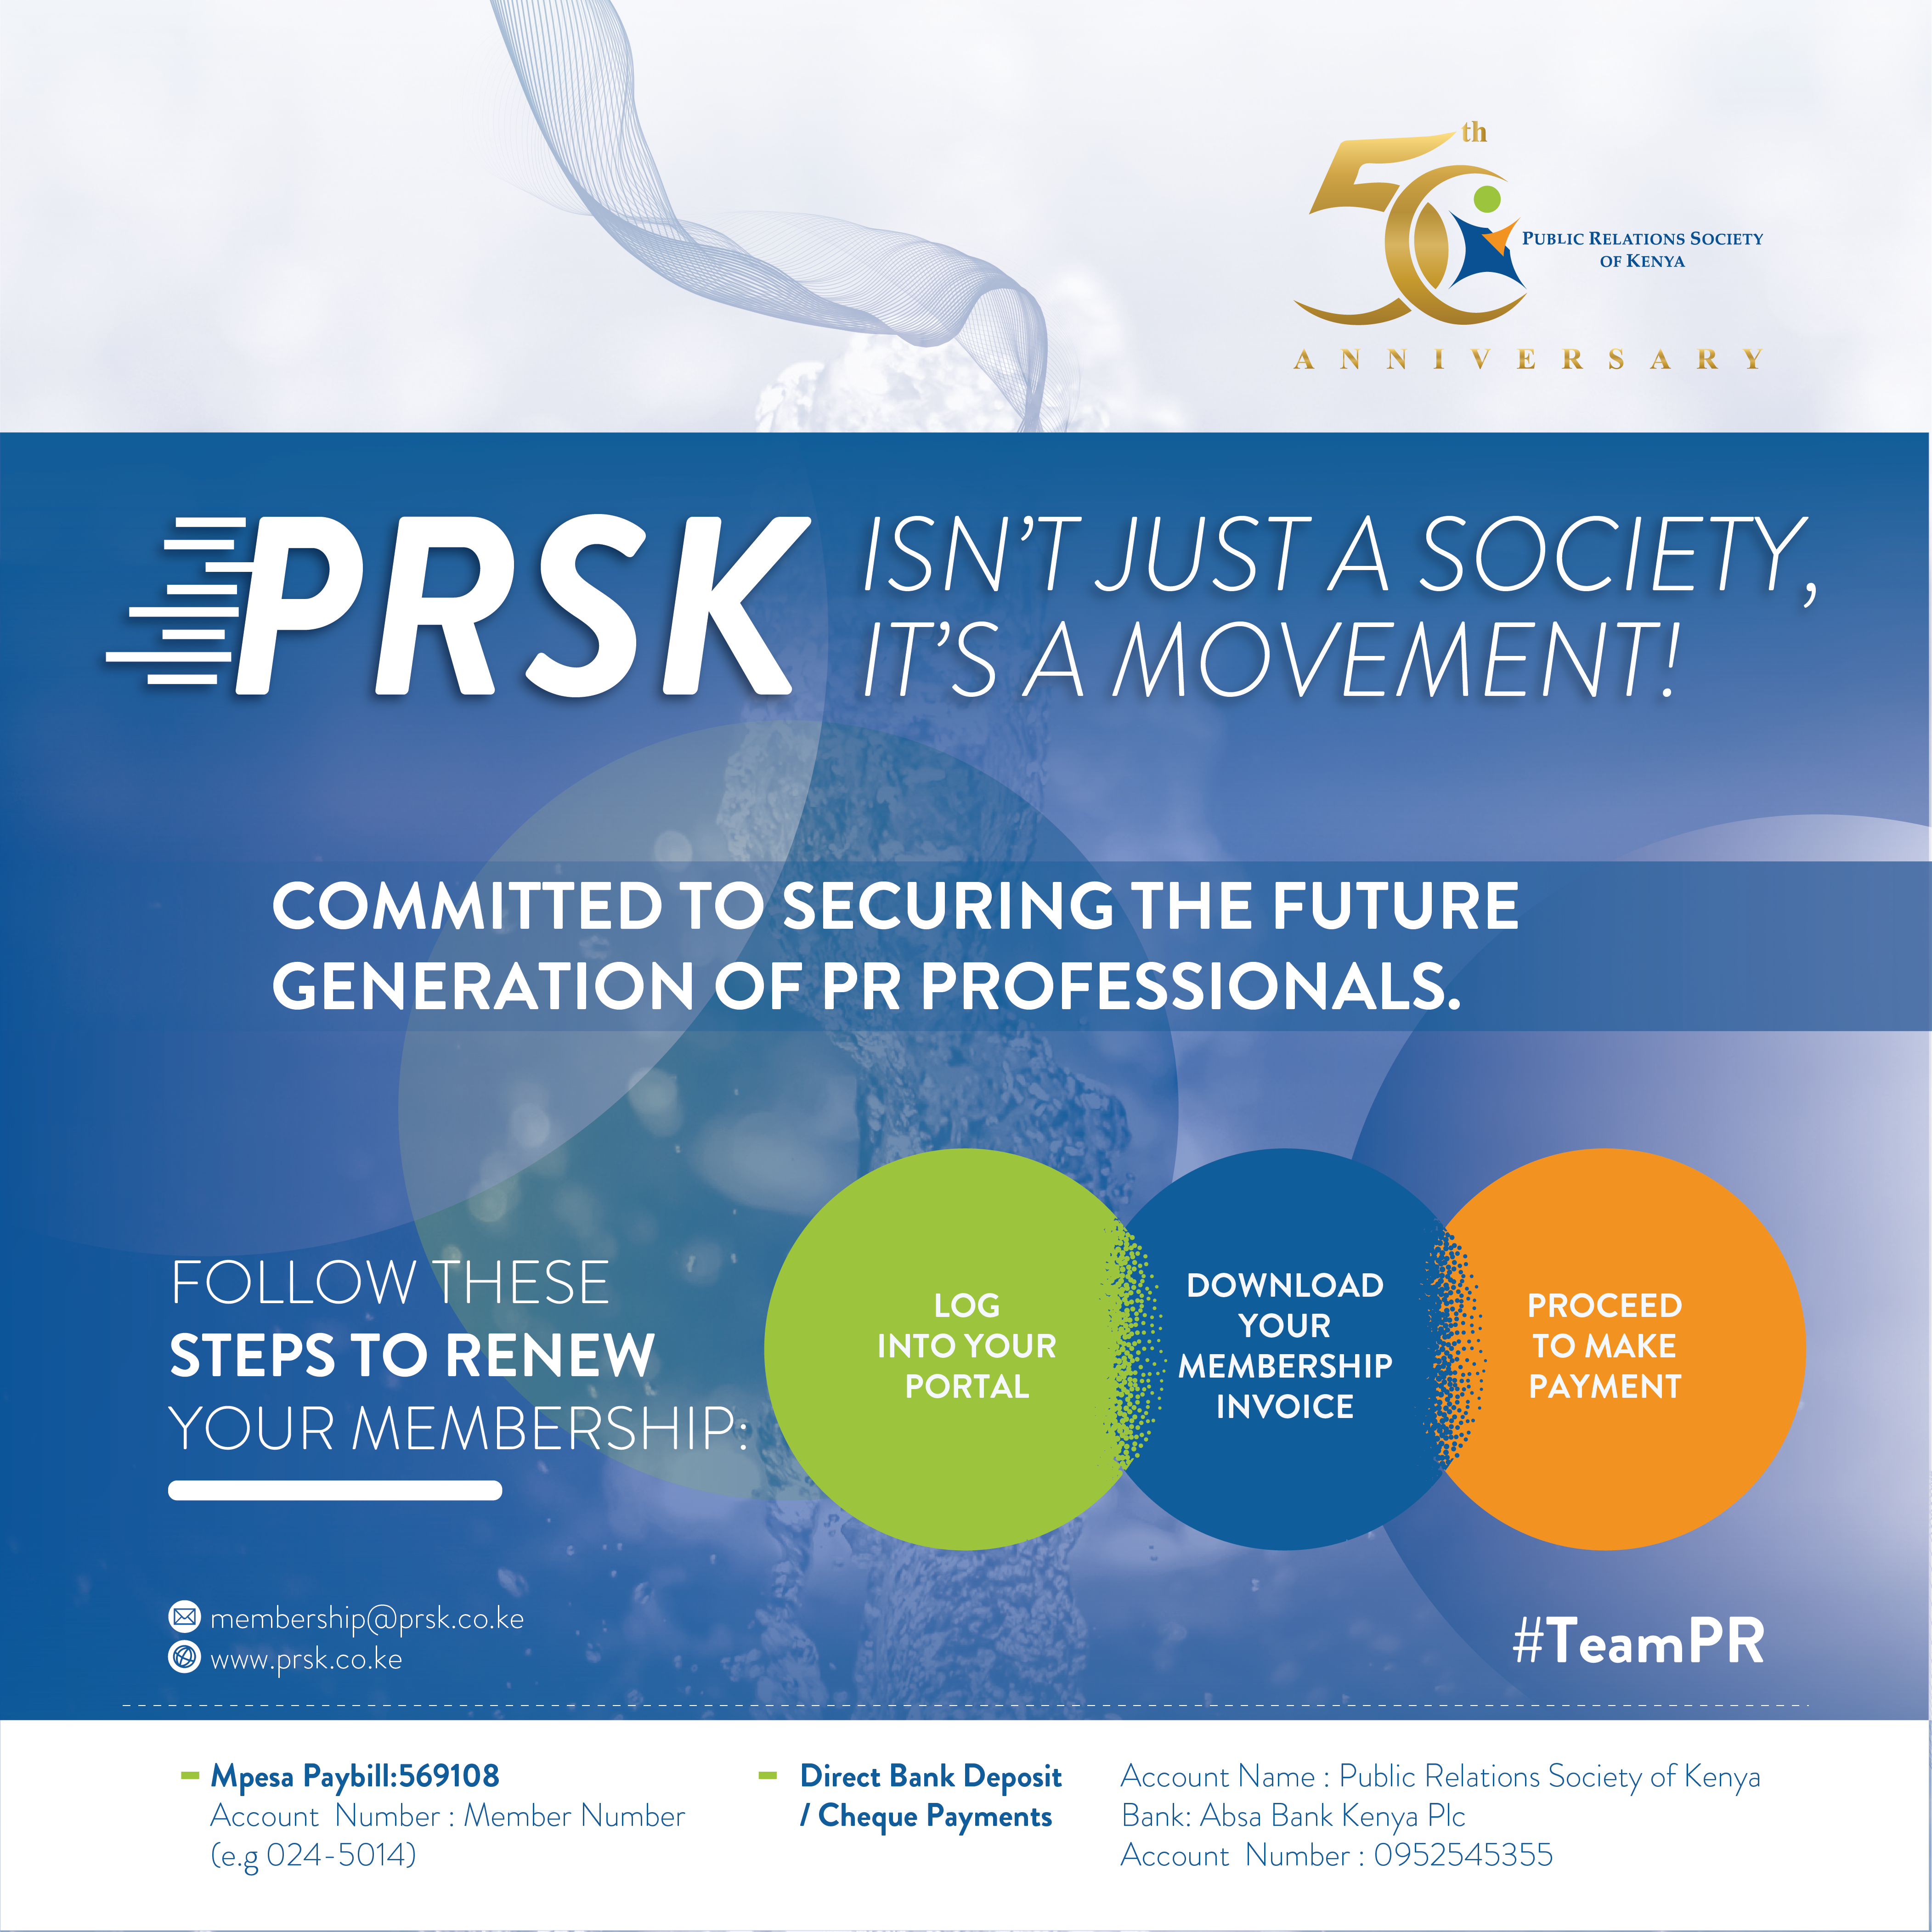 PRSK isn’t just a Society, MOVEMENT